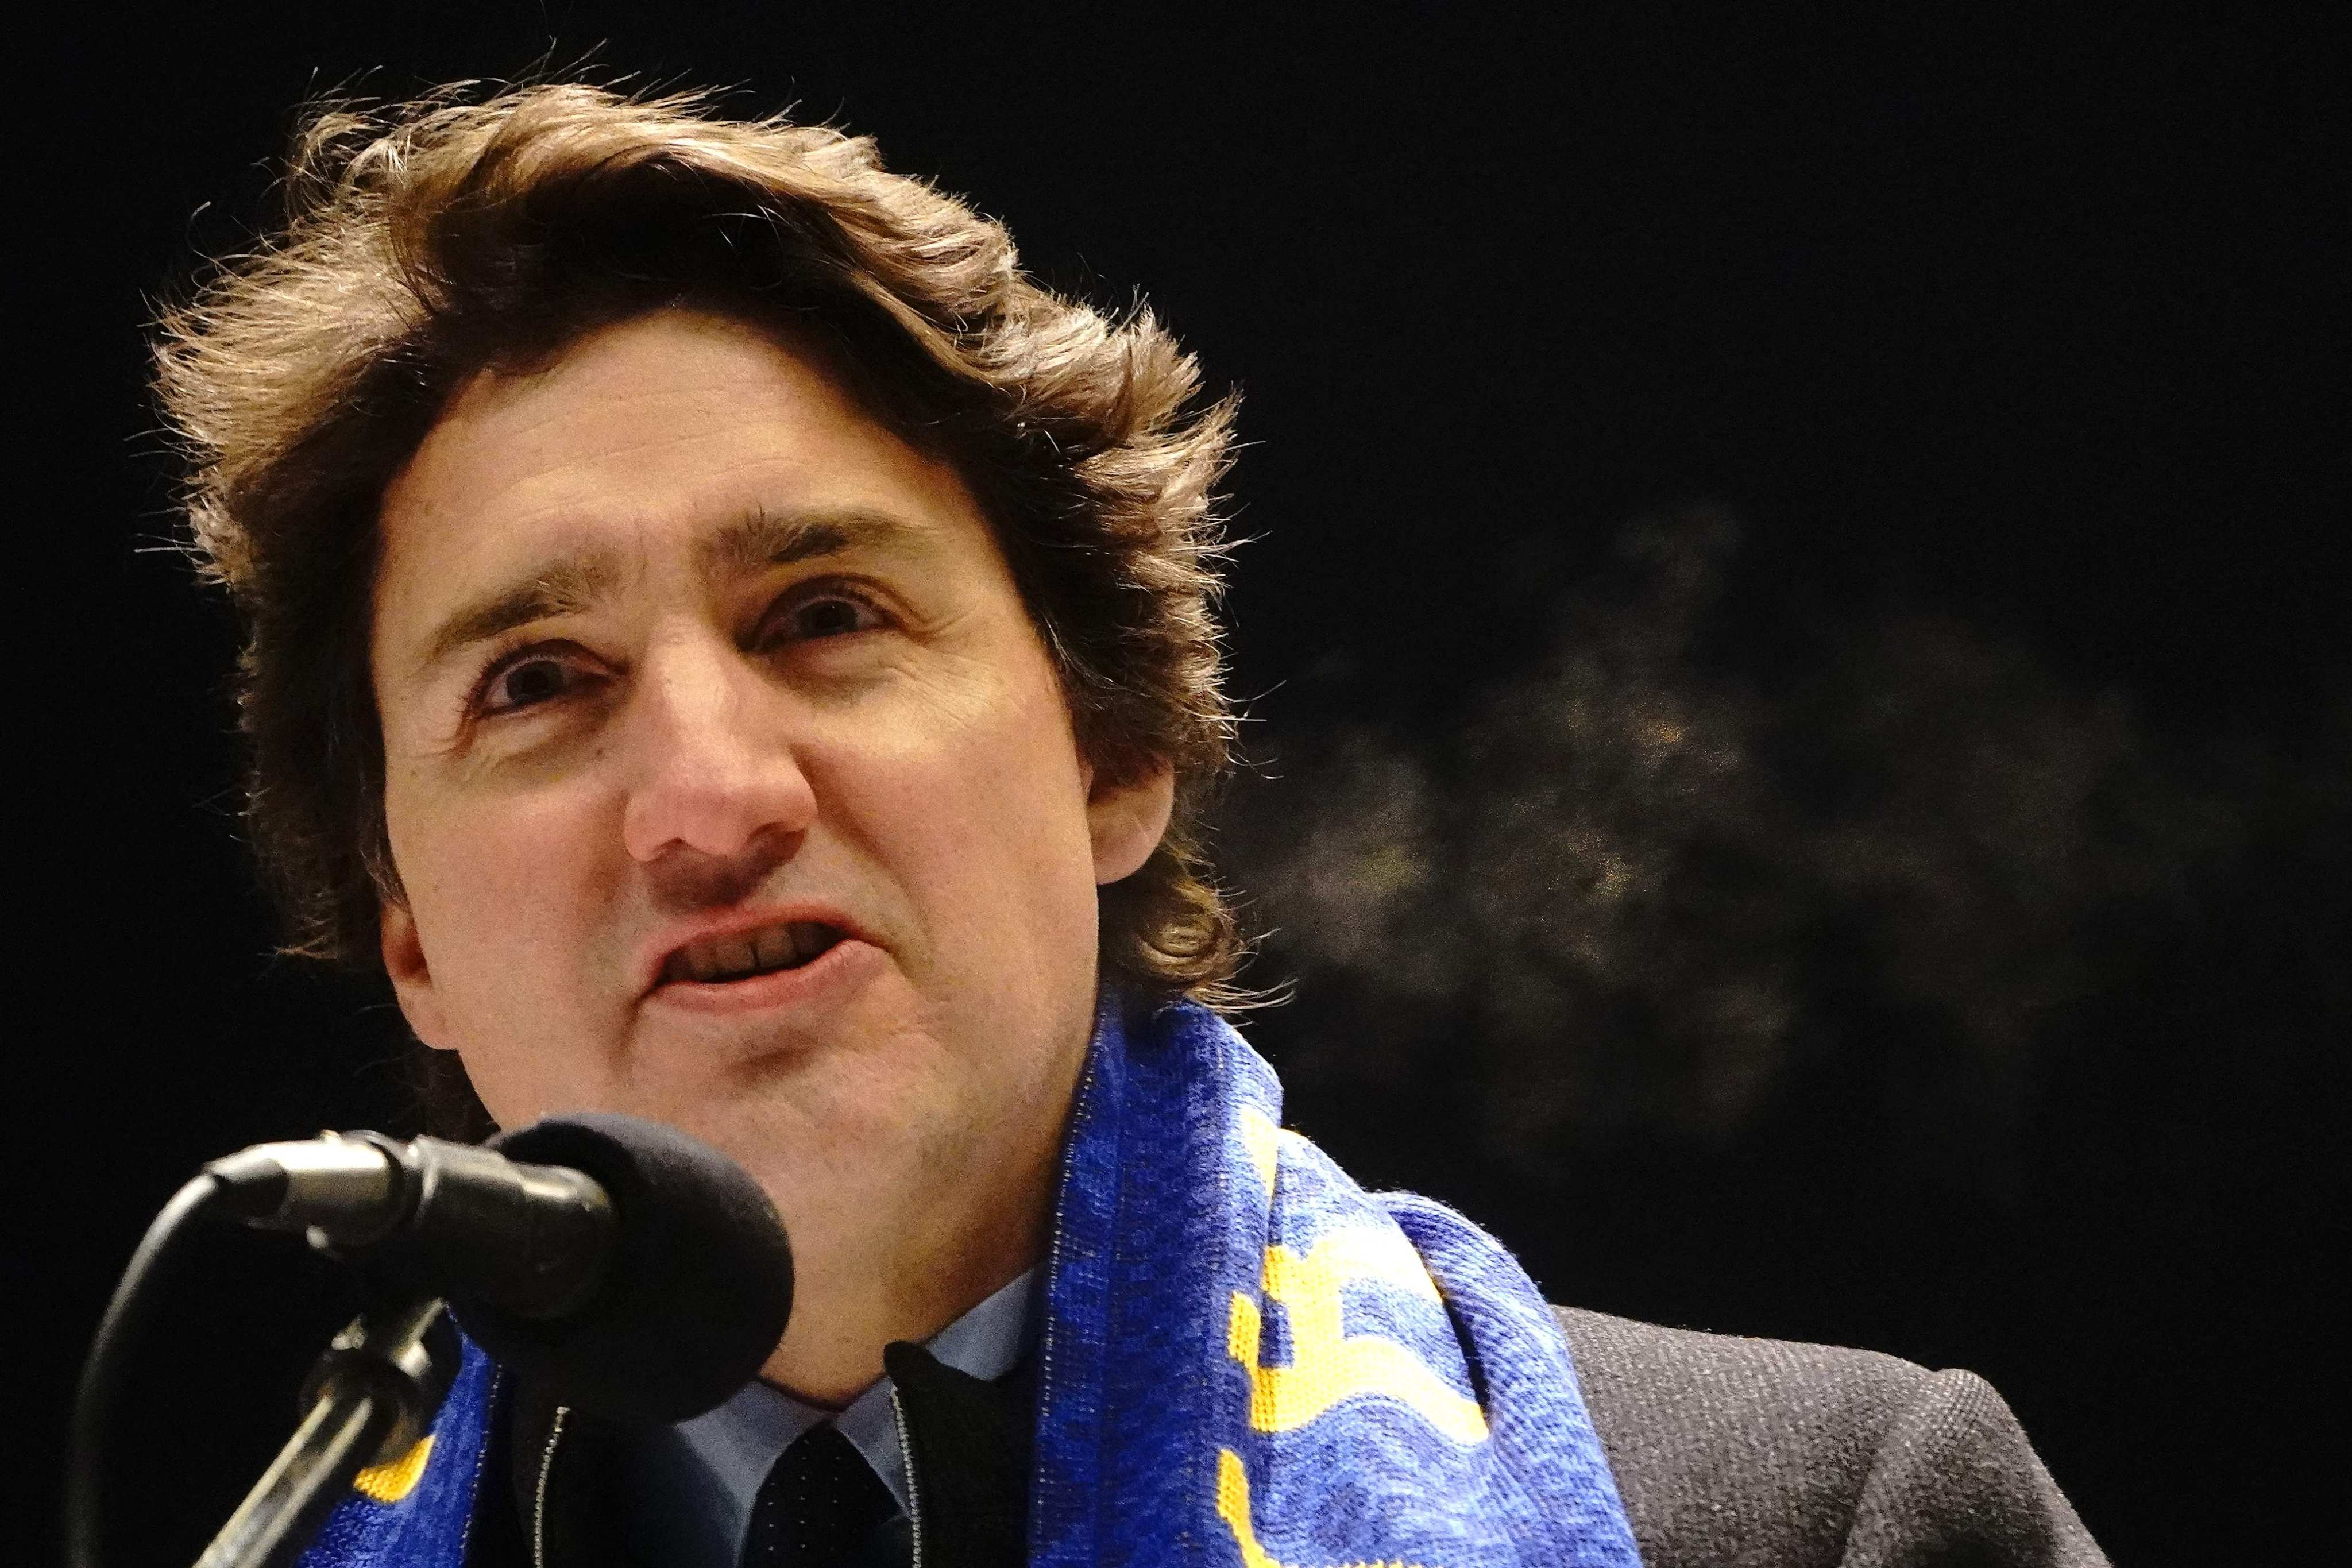 Canada’s Prime Minister Justin Trudeau speaks during a candlelight vigil to mark one year since Russia’s invasion of Ukraine in Toronto on Friday. Photo: AFP